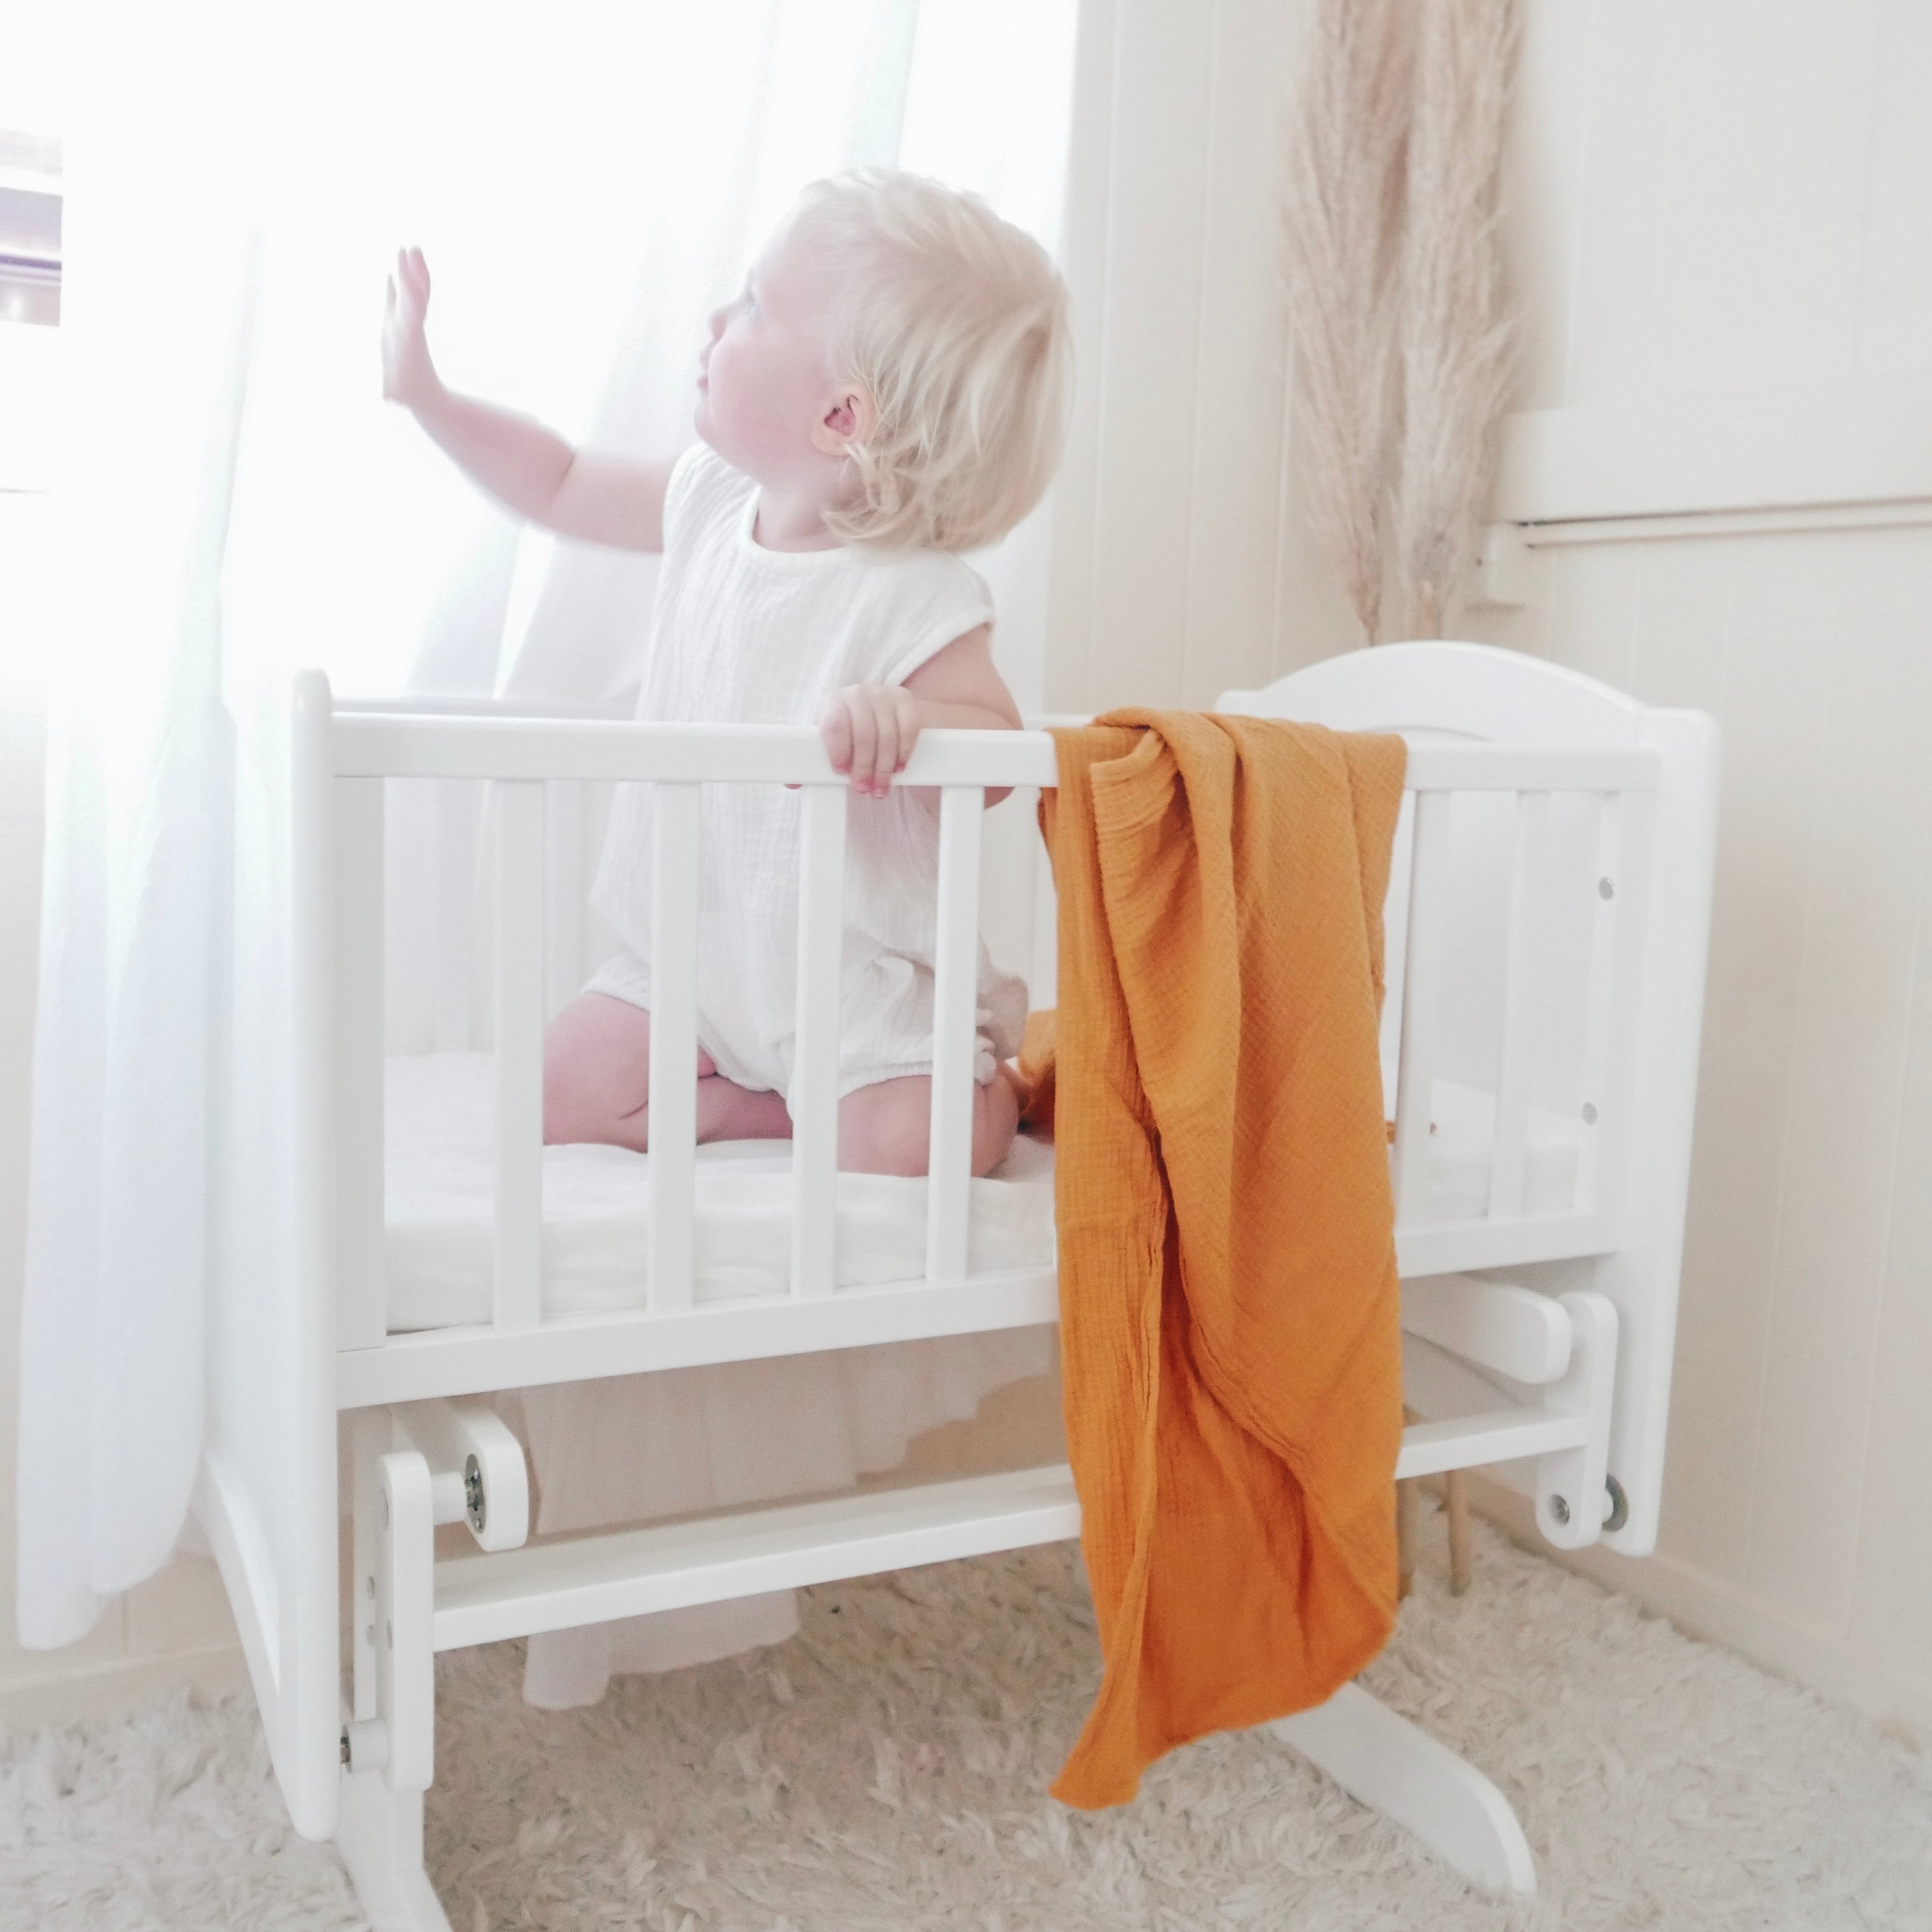 Rocking Cradle with Toddler Demonstrating Strength